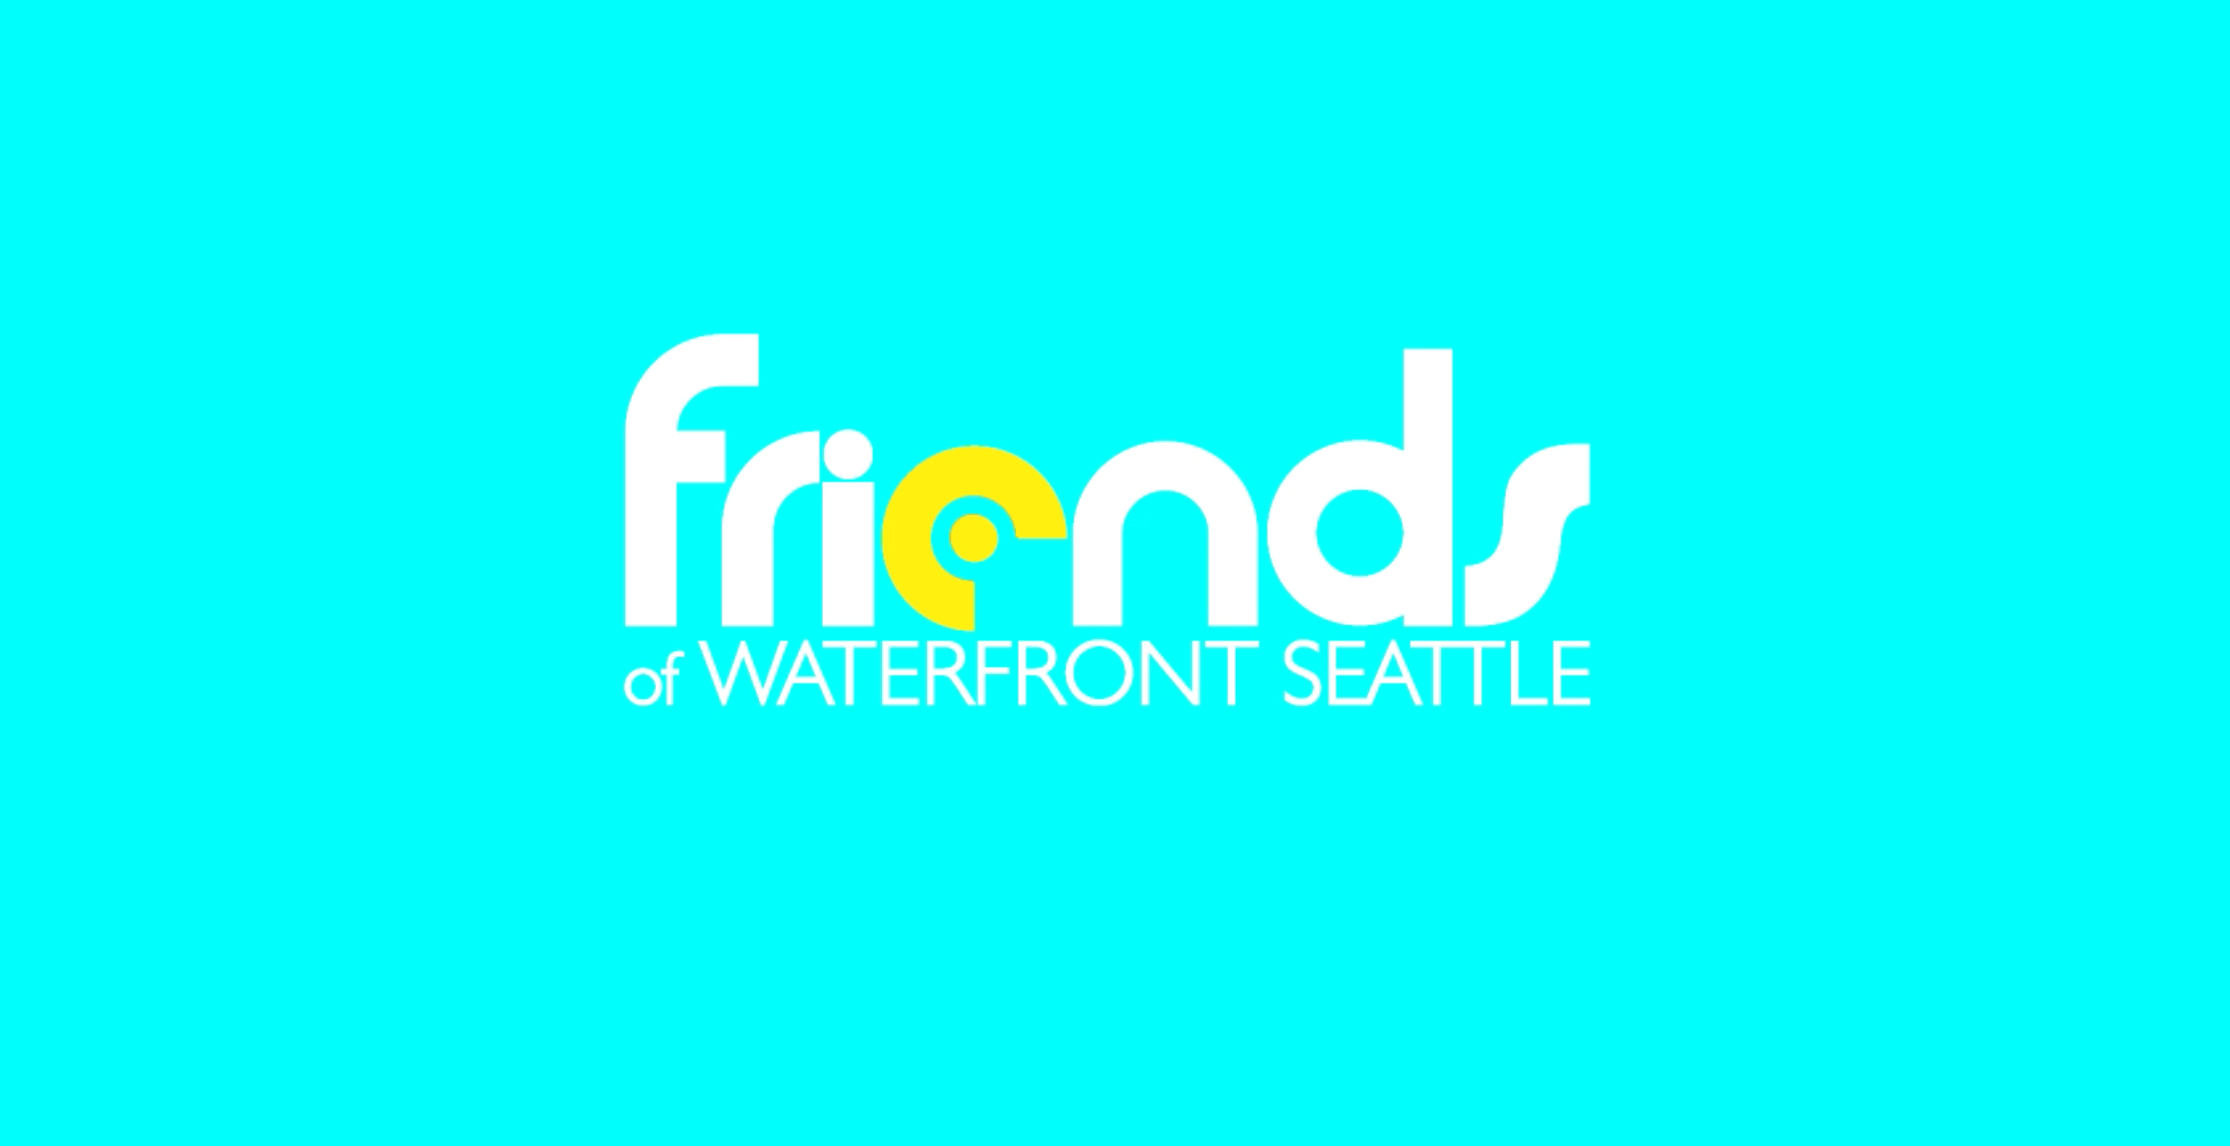 Friends of the Waterfront